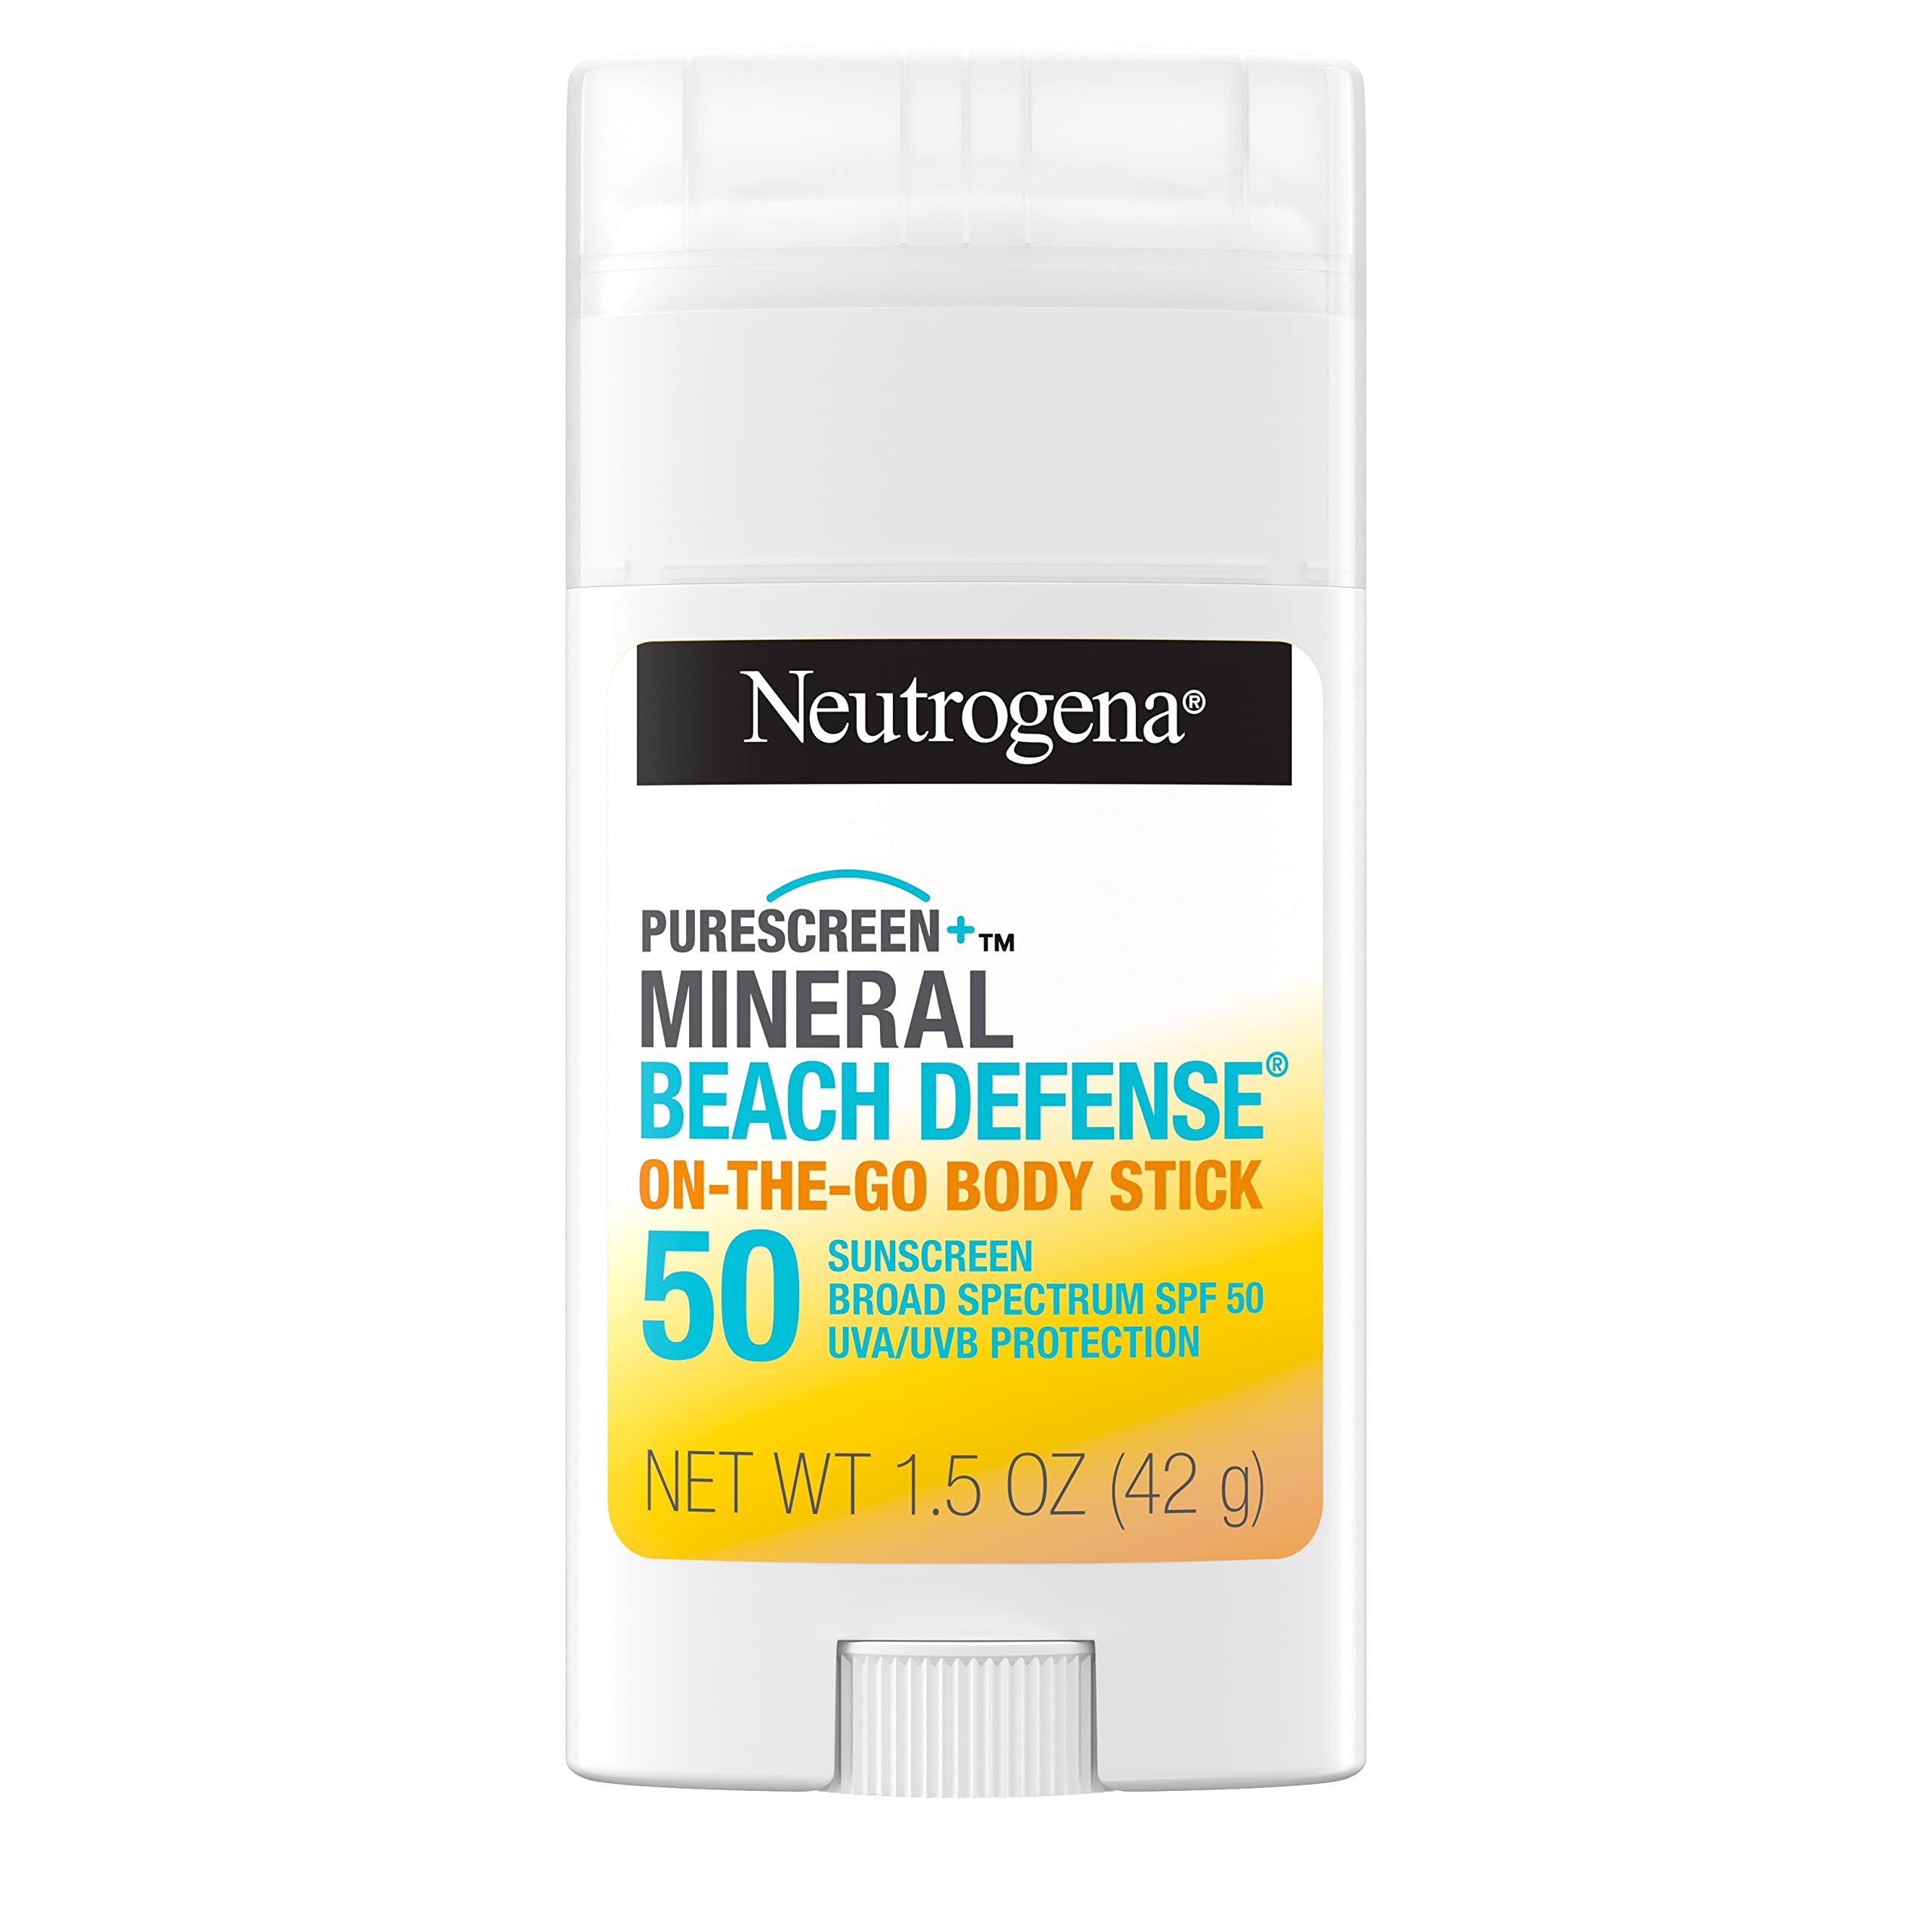 Neutrogena Purescreen+ Mineral Beach Defense On-The-Go Body Sunscreen Stick with Broad Spectrum SPF 50, Water Resistant UVA/UVB Protection, Absorbs Quickly & Dries Clear, 1.5 oz